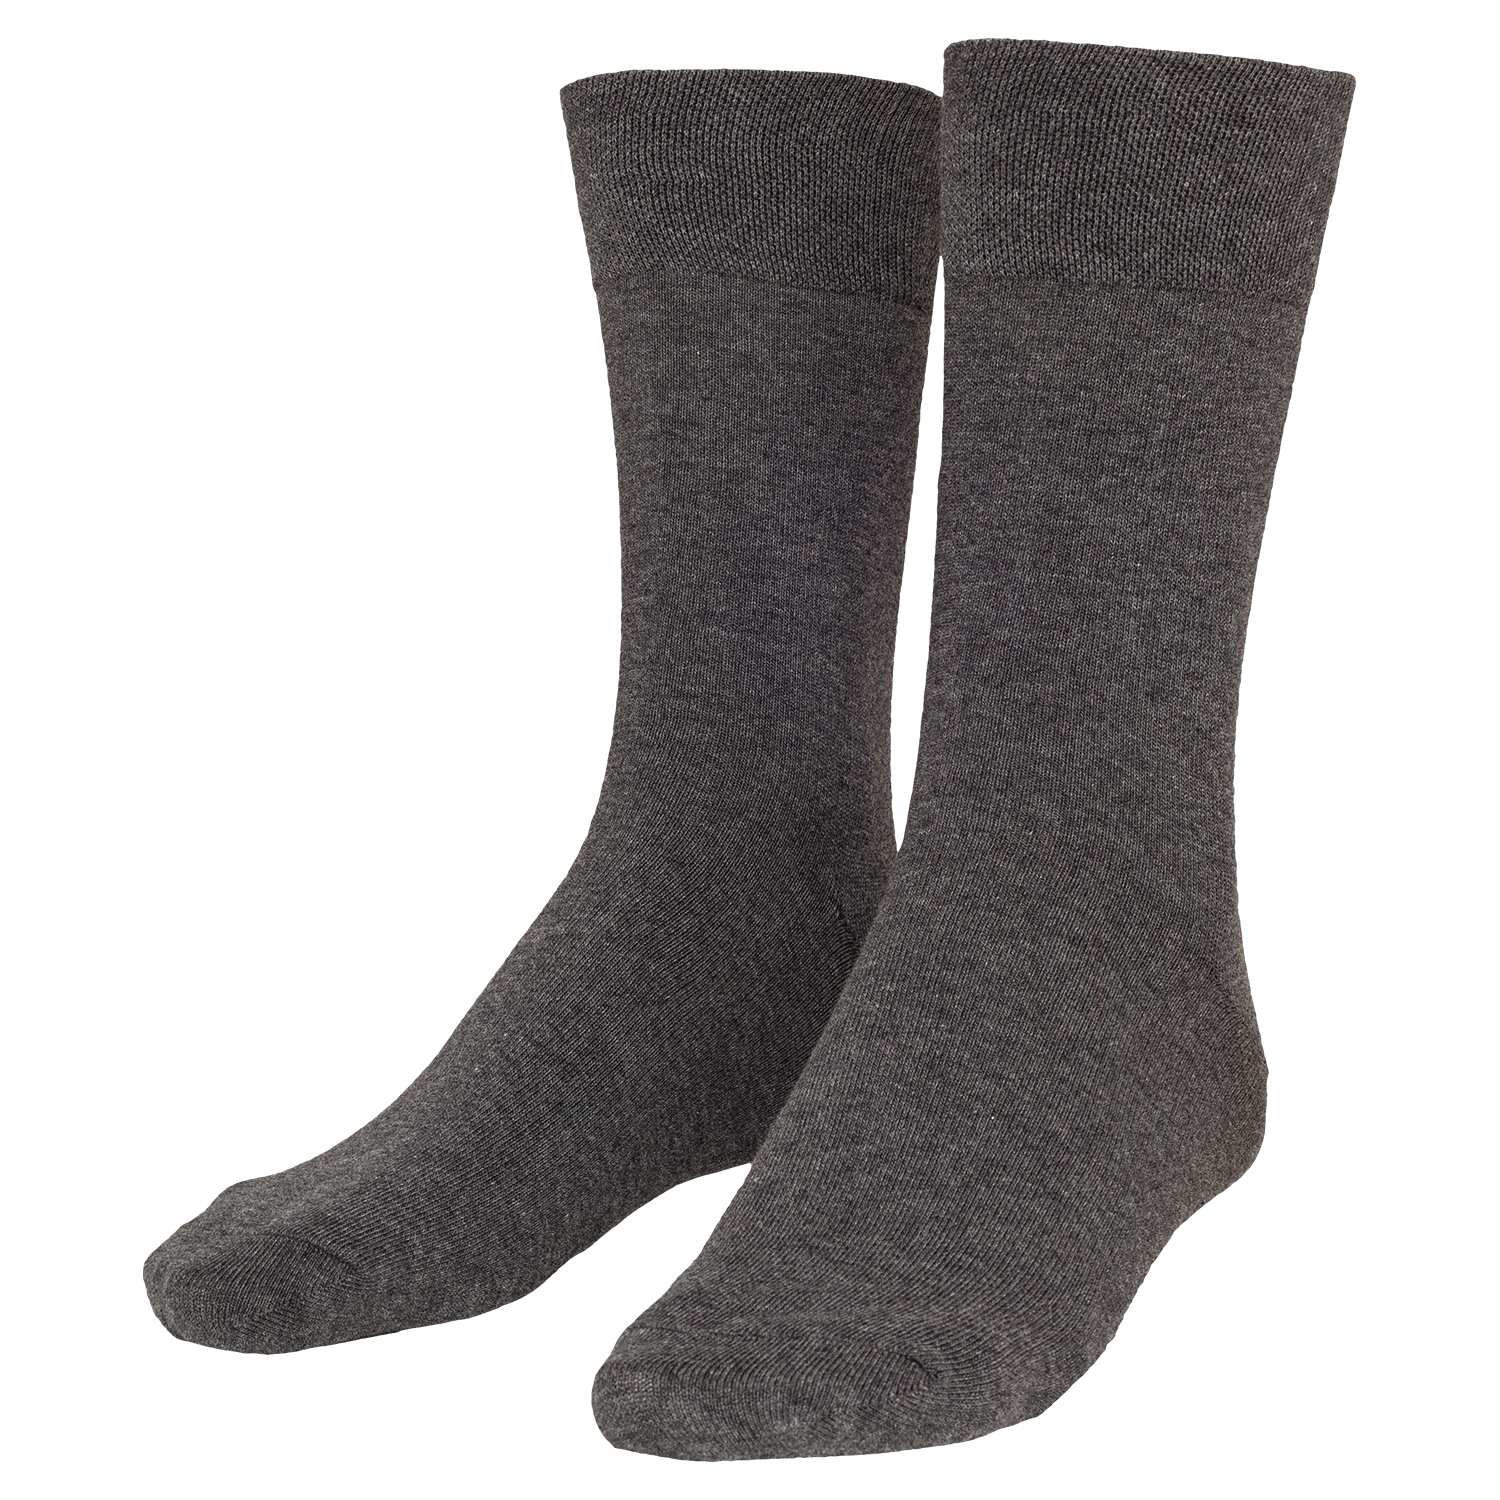 Men's sock soft in anthracite mottled double pack up to size 51/54